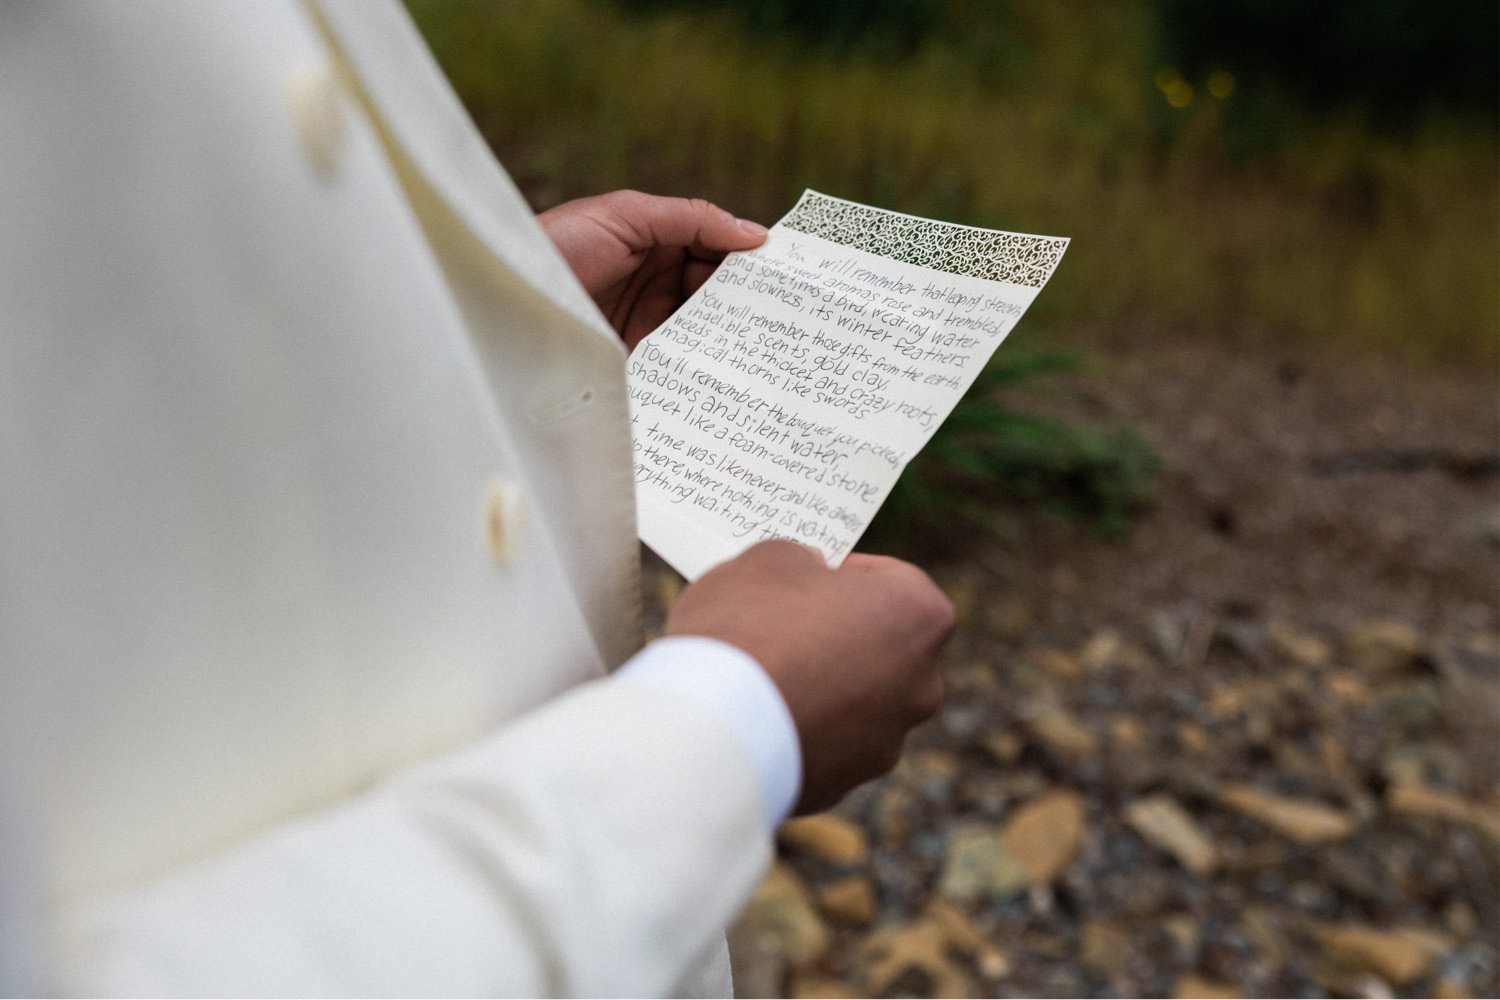 012_The Orchard Hood River Wedding42_man in white suit holds handwritten note.jpg